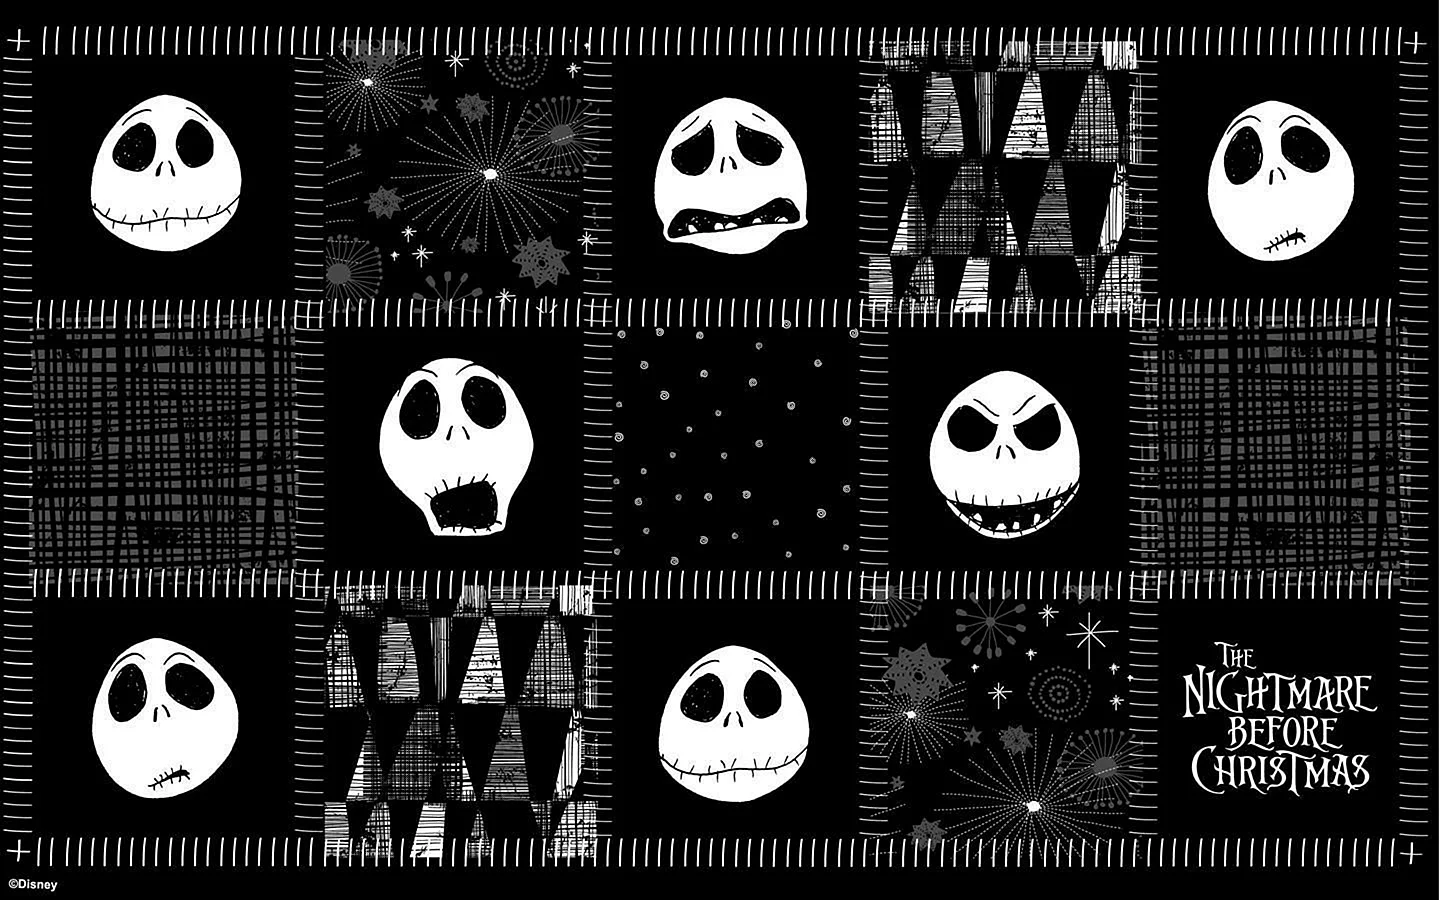 The Nightmare Before Christmas Wallpaper